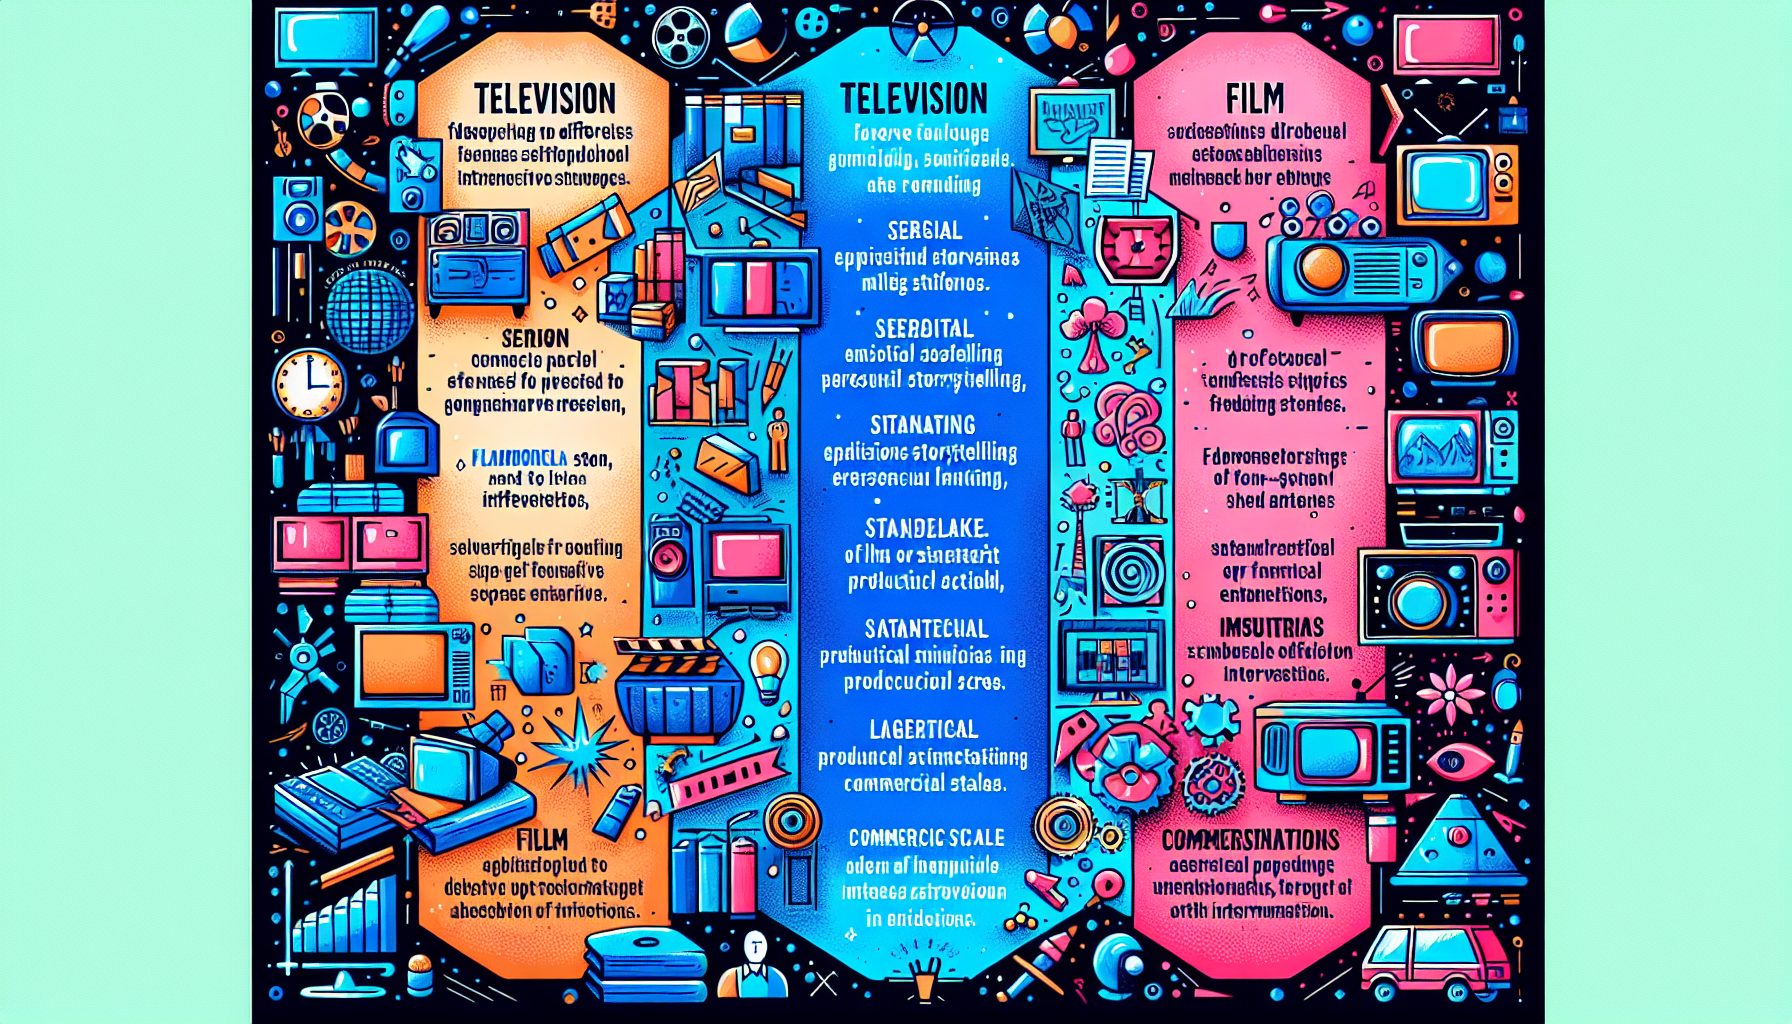 Illustration defining the key differences between television and film, in an artistic and modern style. On one side of the image, showcase symbolic characteristics of television - involving factors like a serial format, episodic storytelling, and frequent commercial breaks. On the other side, display representative elements of films like a standalone, longer narrative, larger production scales, and the absence of commercial interruptions. The illustration should be colorful with vibrant hues used to differentiate between the two mediums.